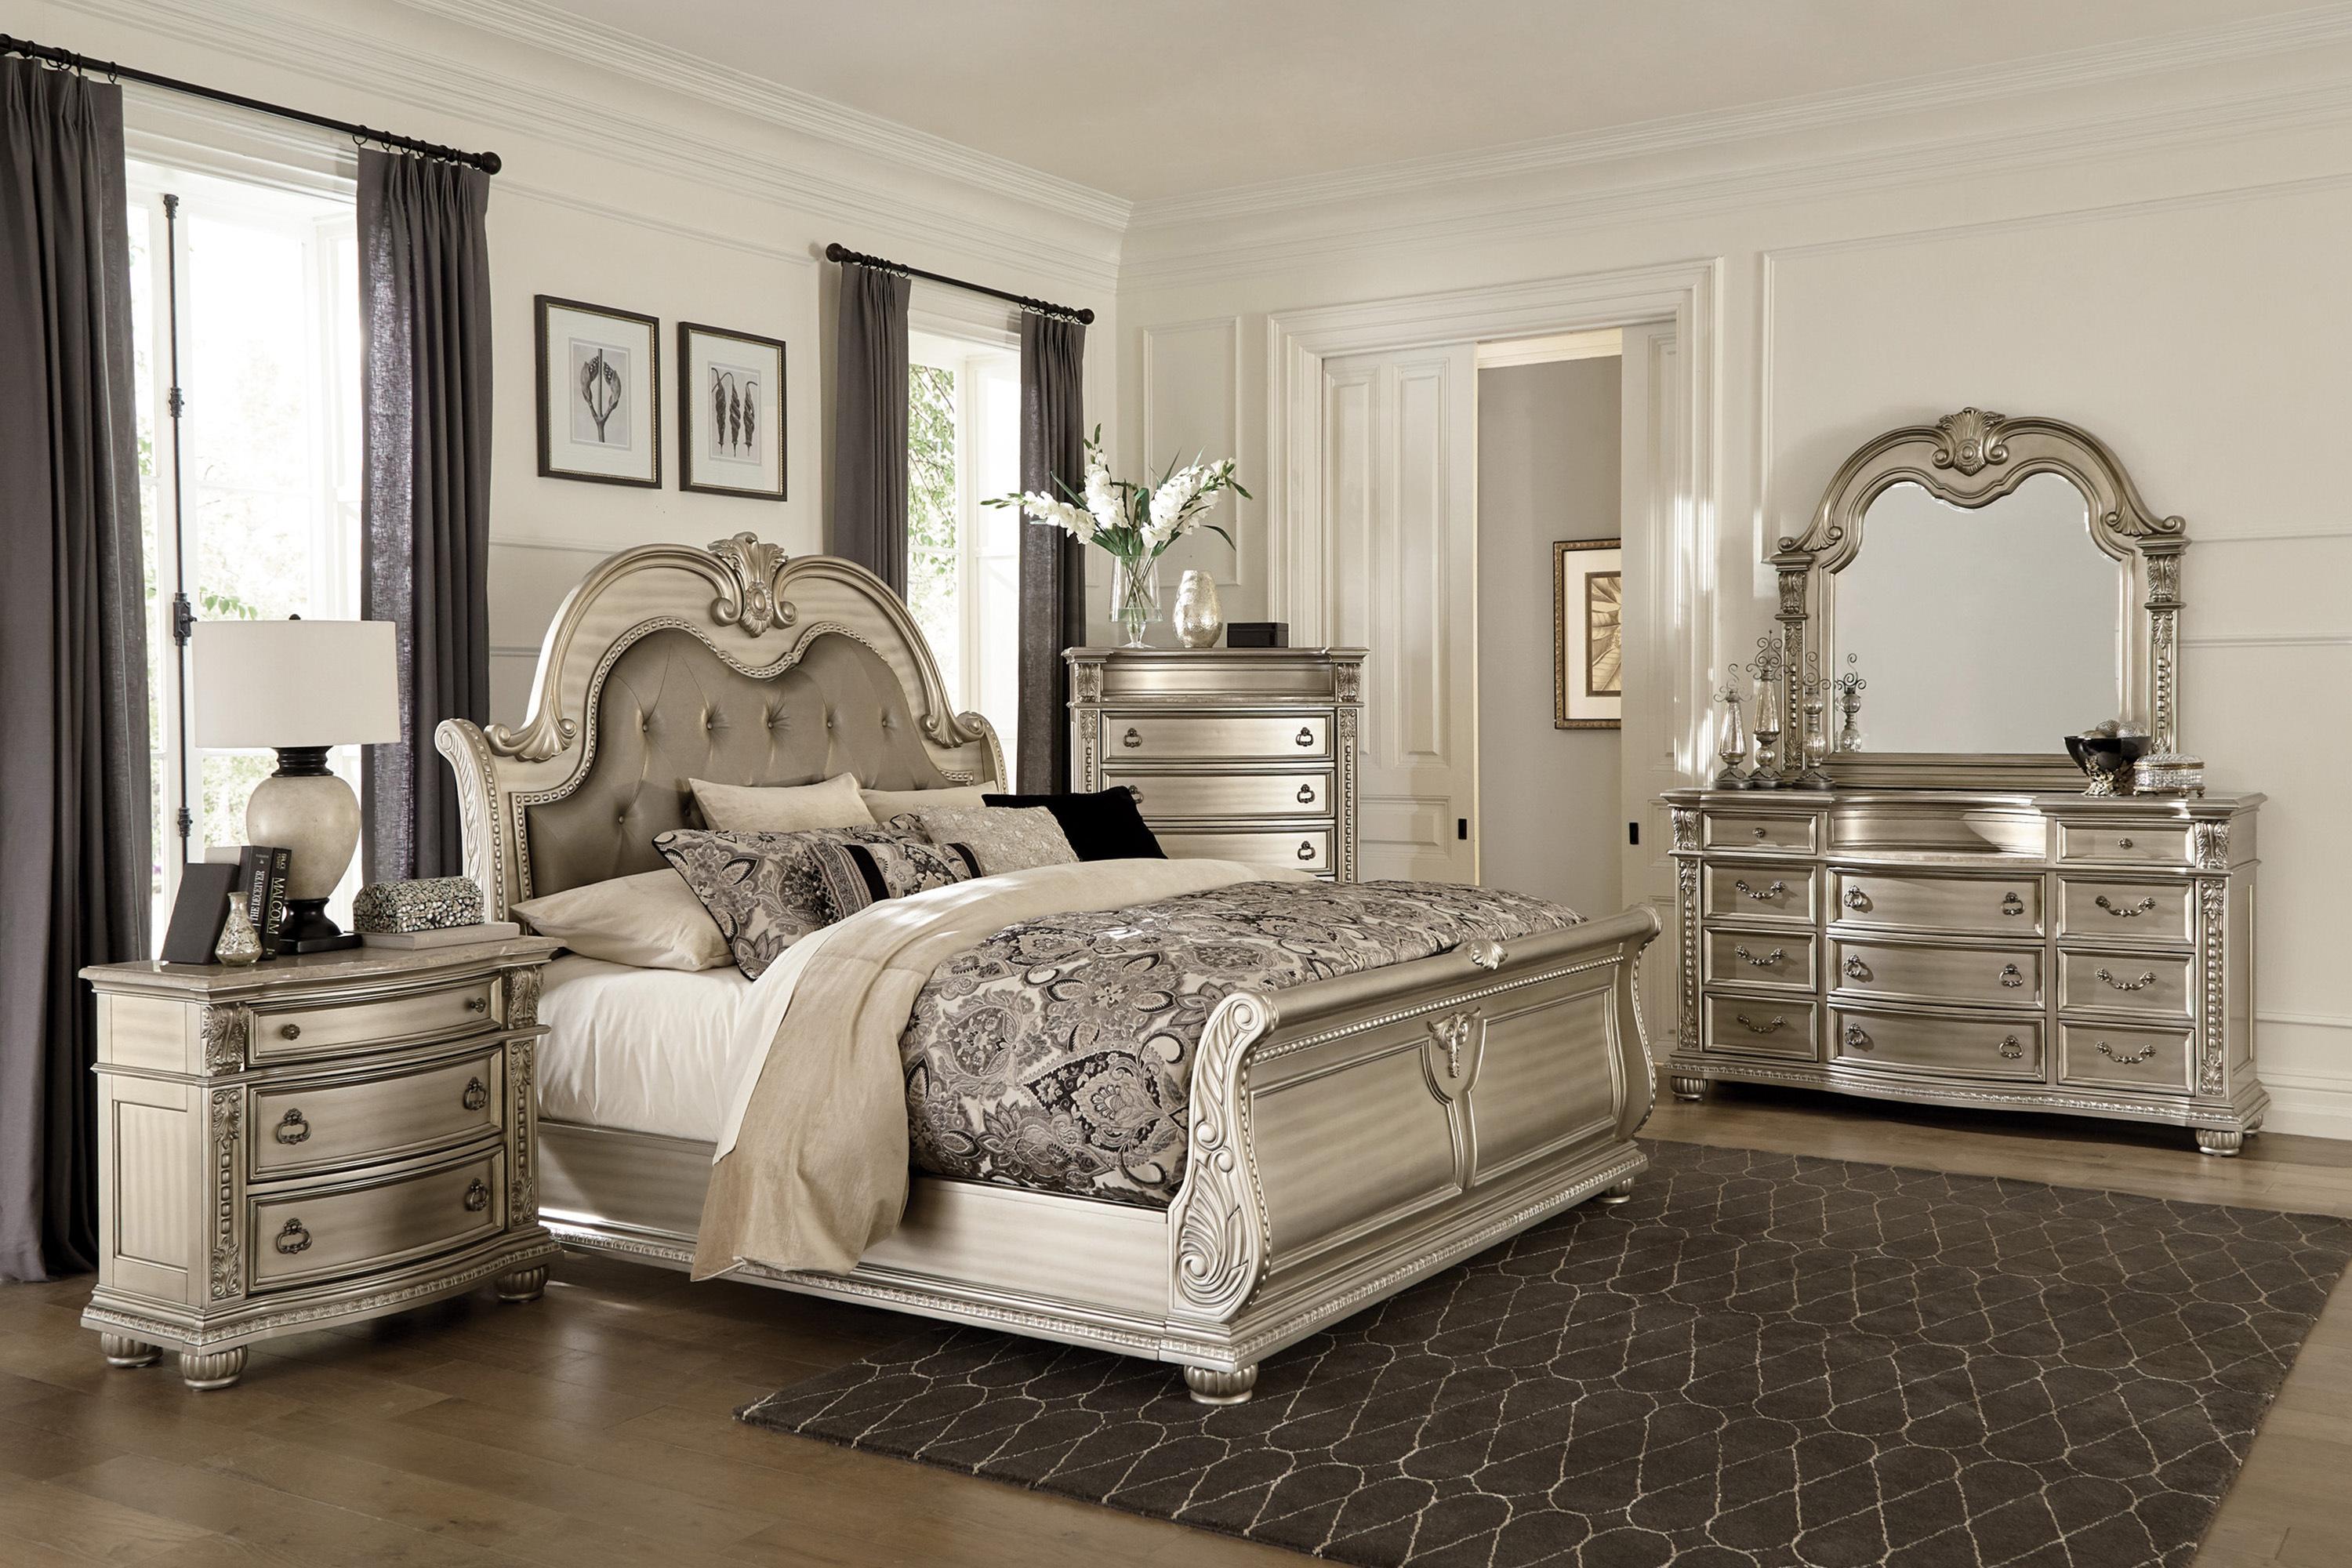 Classic Bedroom Set 1757SVK-1CK-6PC Cavalier 1757SVK-1CK-6PC in Silver Faux Leather